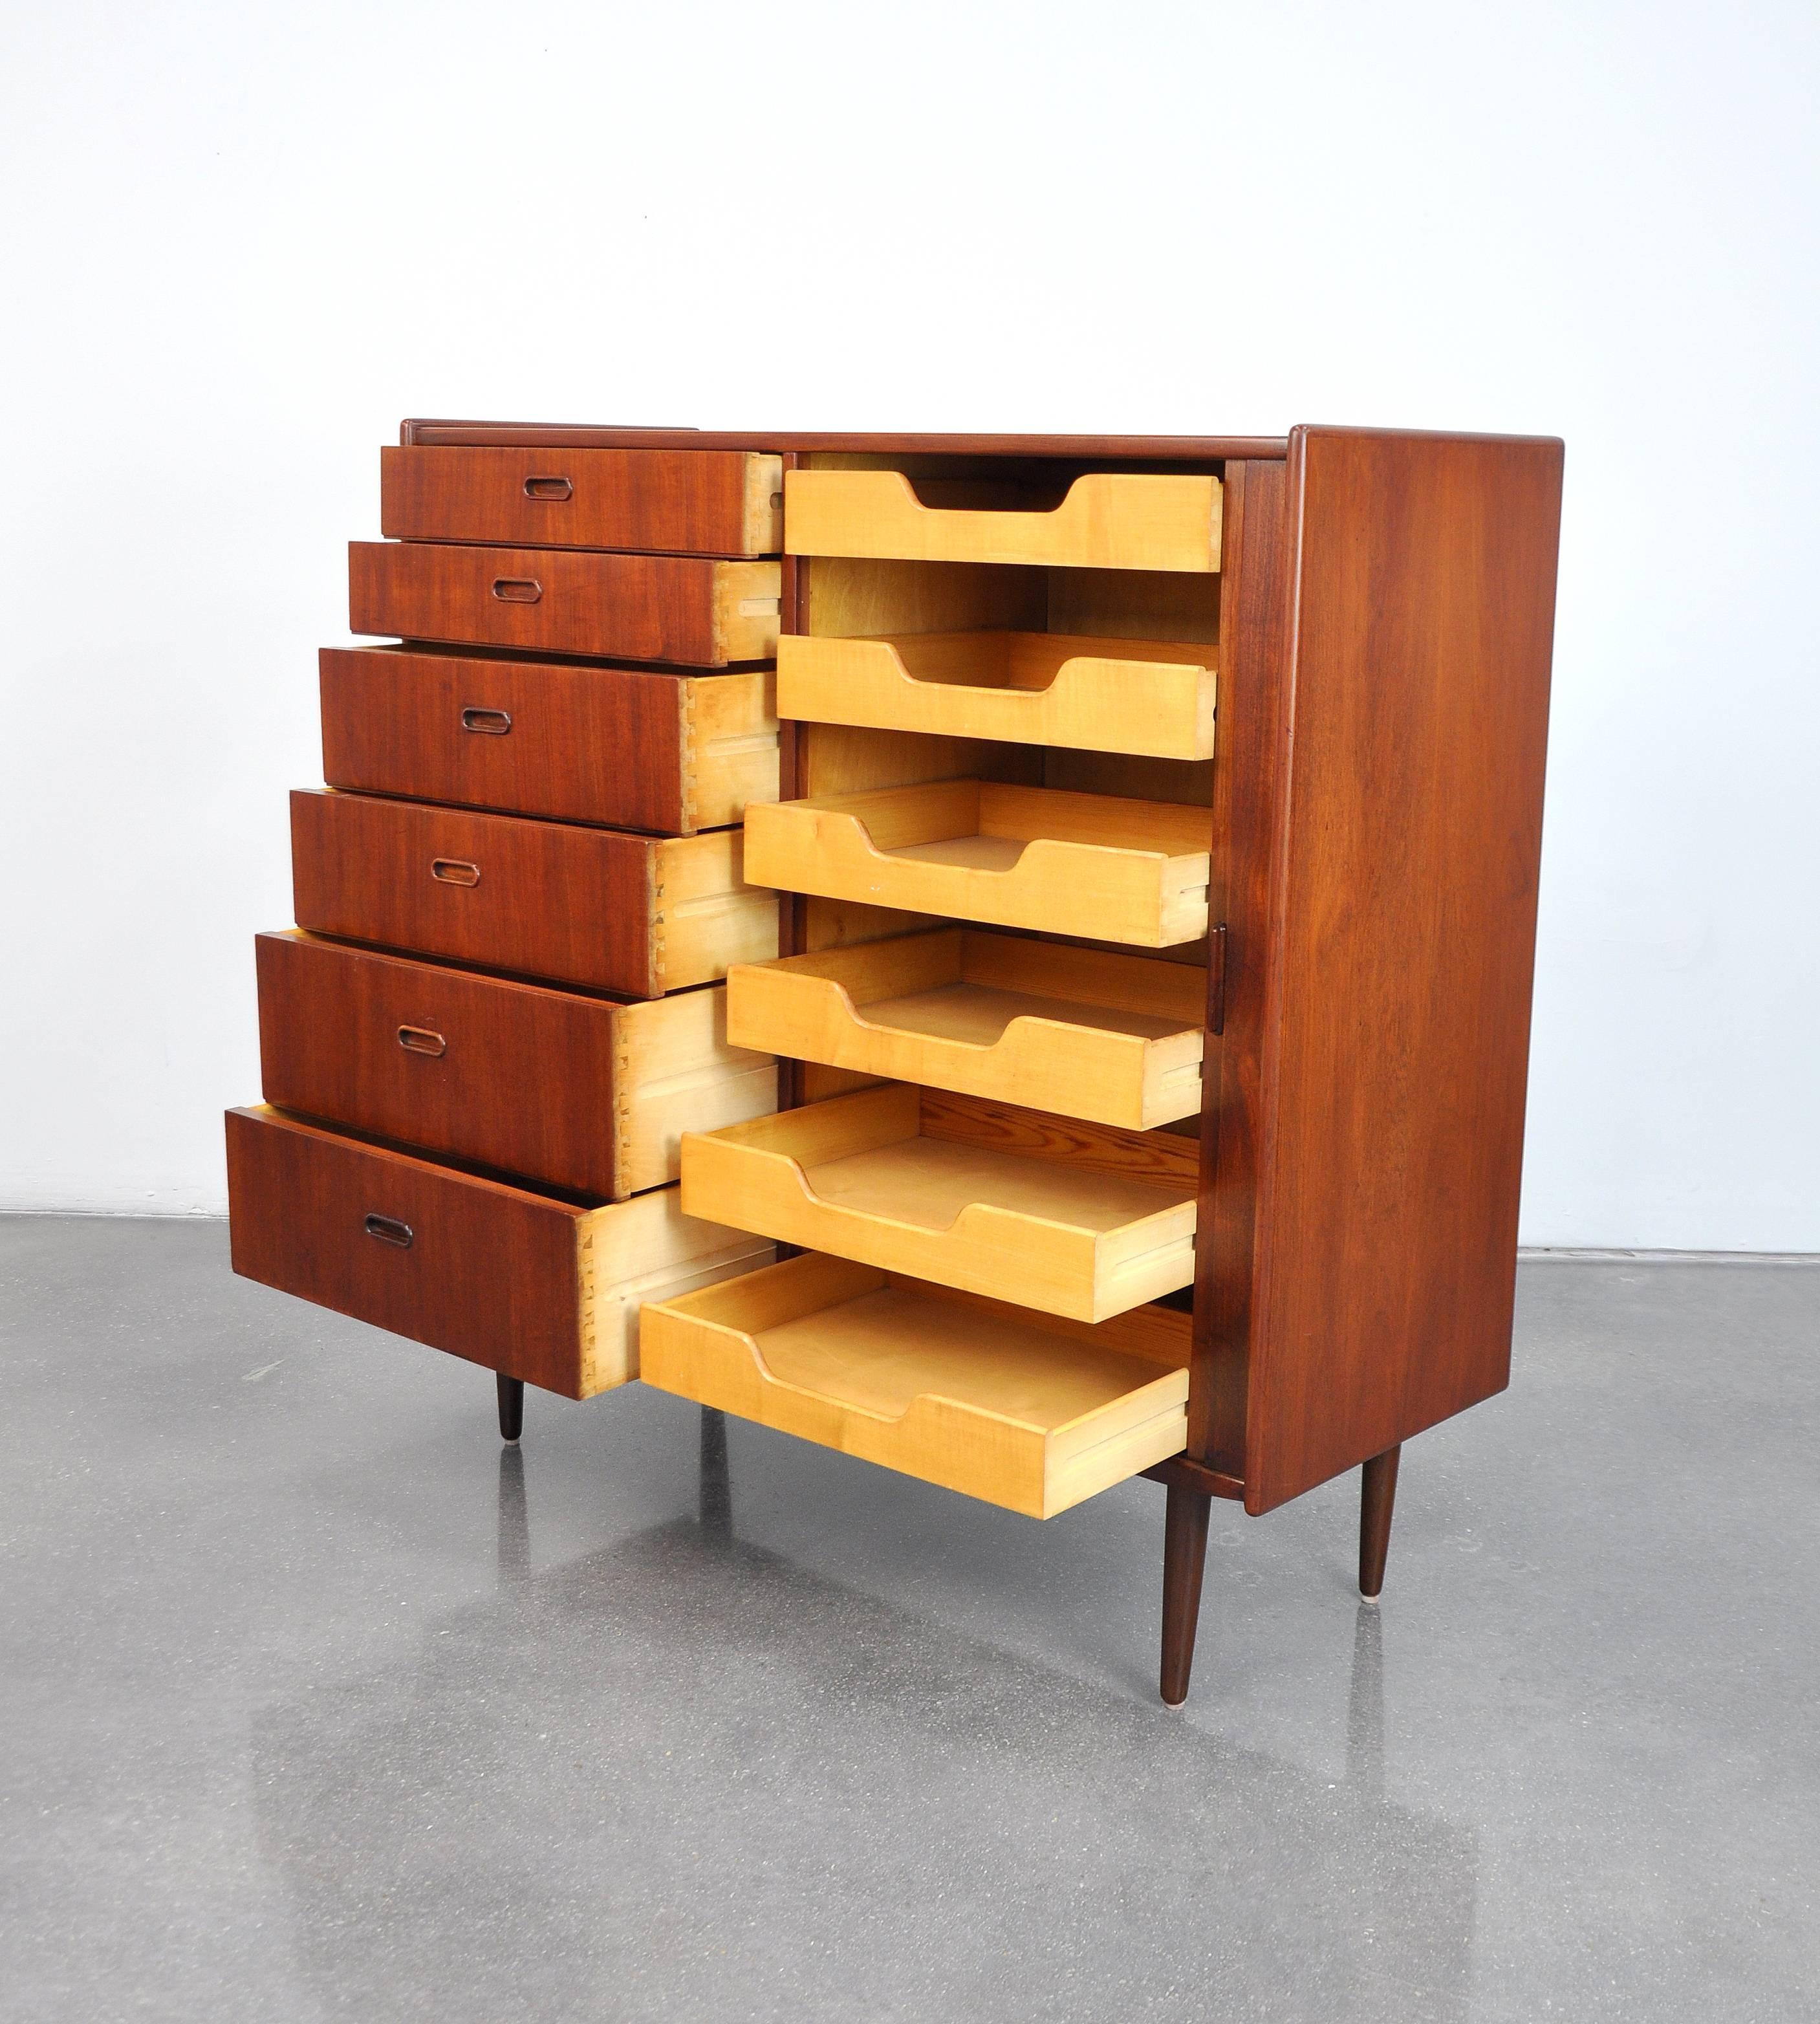 Both gorgeous and functional, this Mid-Century Danish Modern bachelor's chest of drawers dates from the 1960s. With a total of 12 drawers, it provides a ton of storage space. The vintage gentleman's wardrobe features sculpted teak handles, tambour